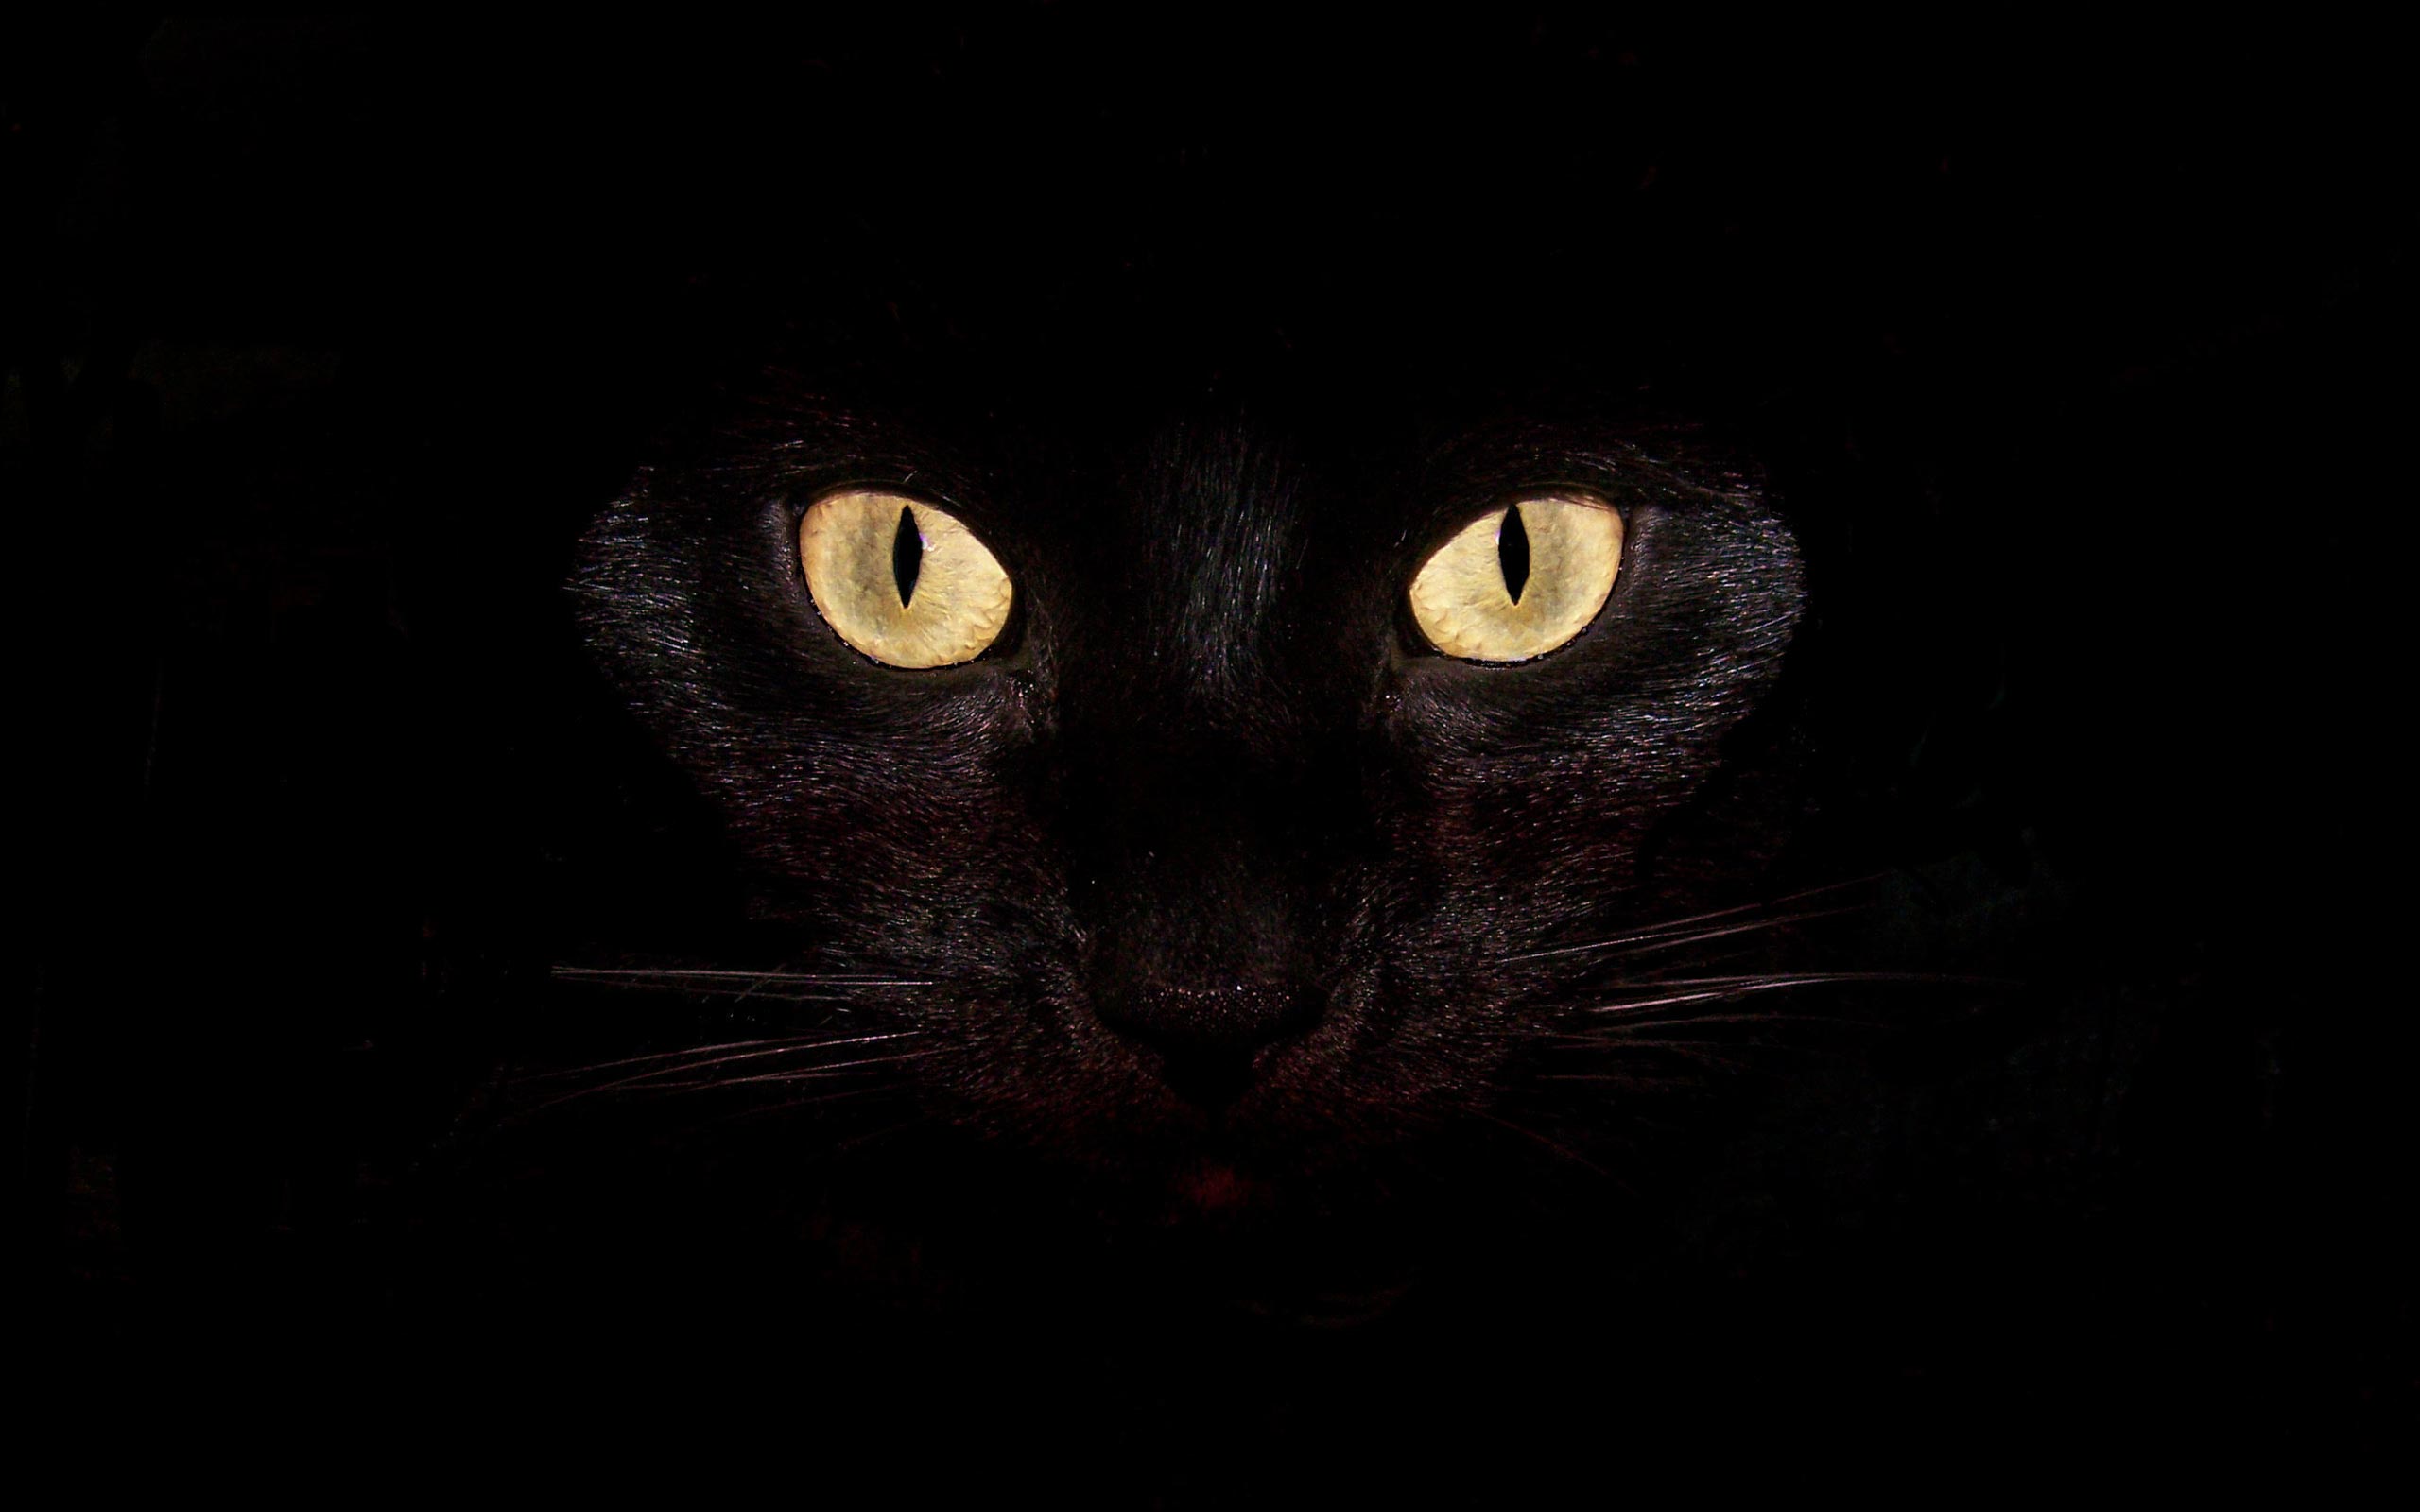 Abstract Black Cat Background Wallpaper High Quality